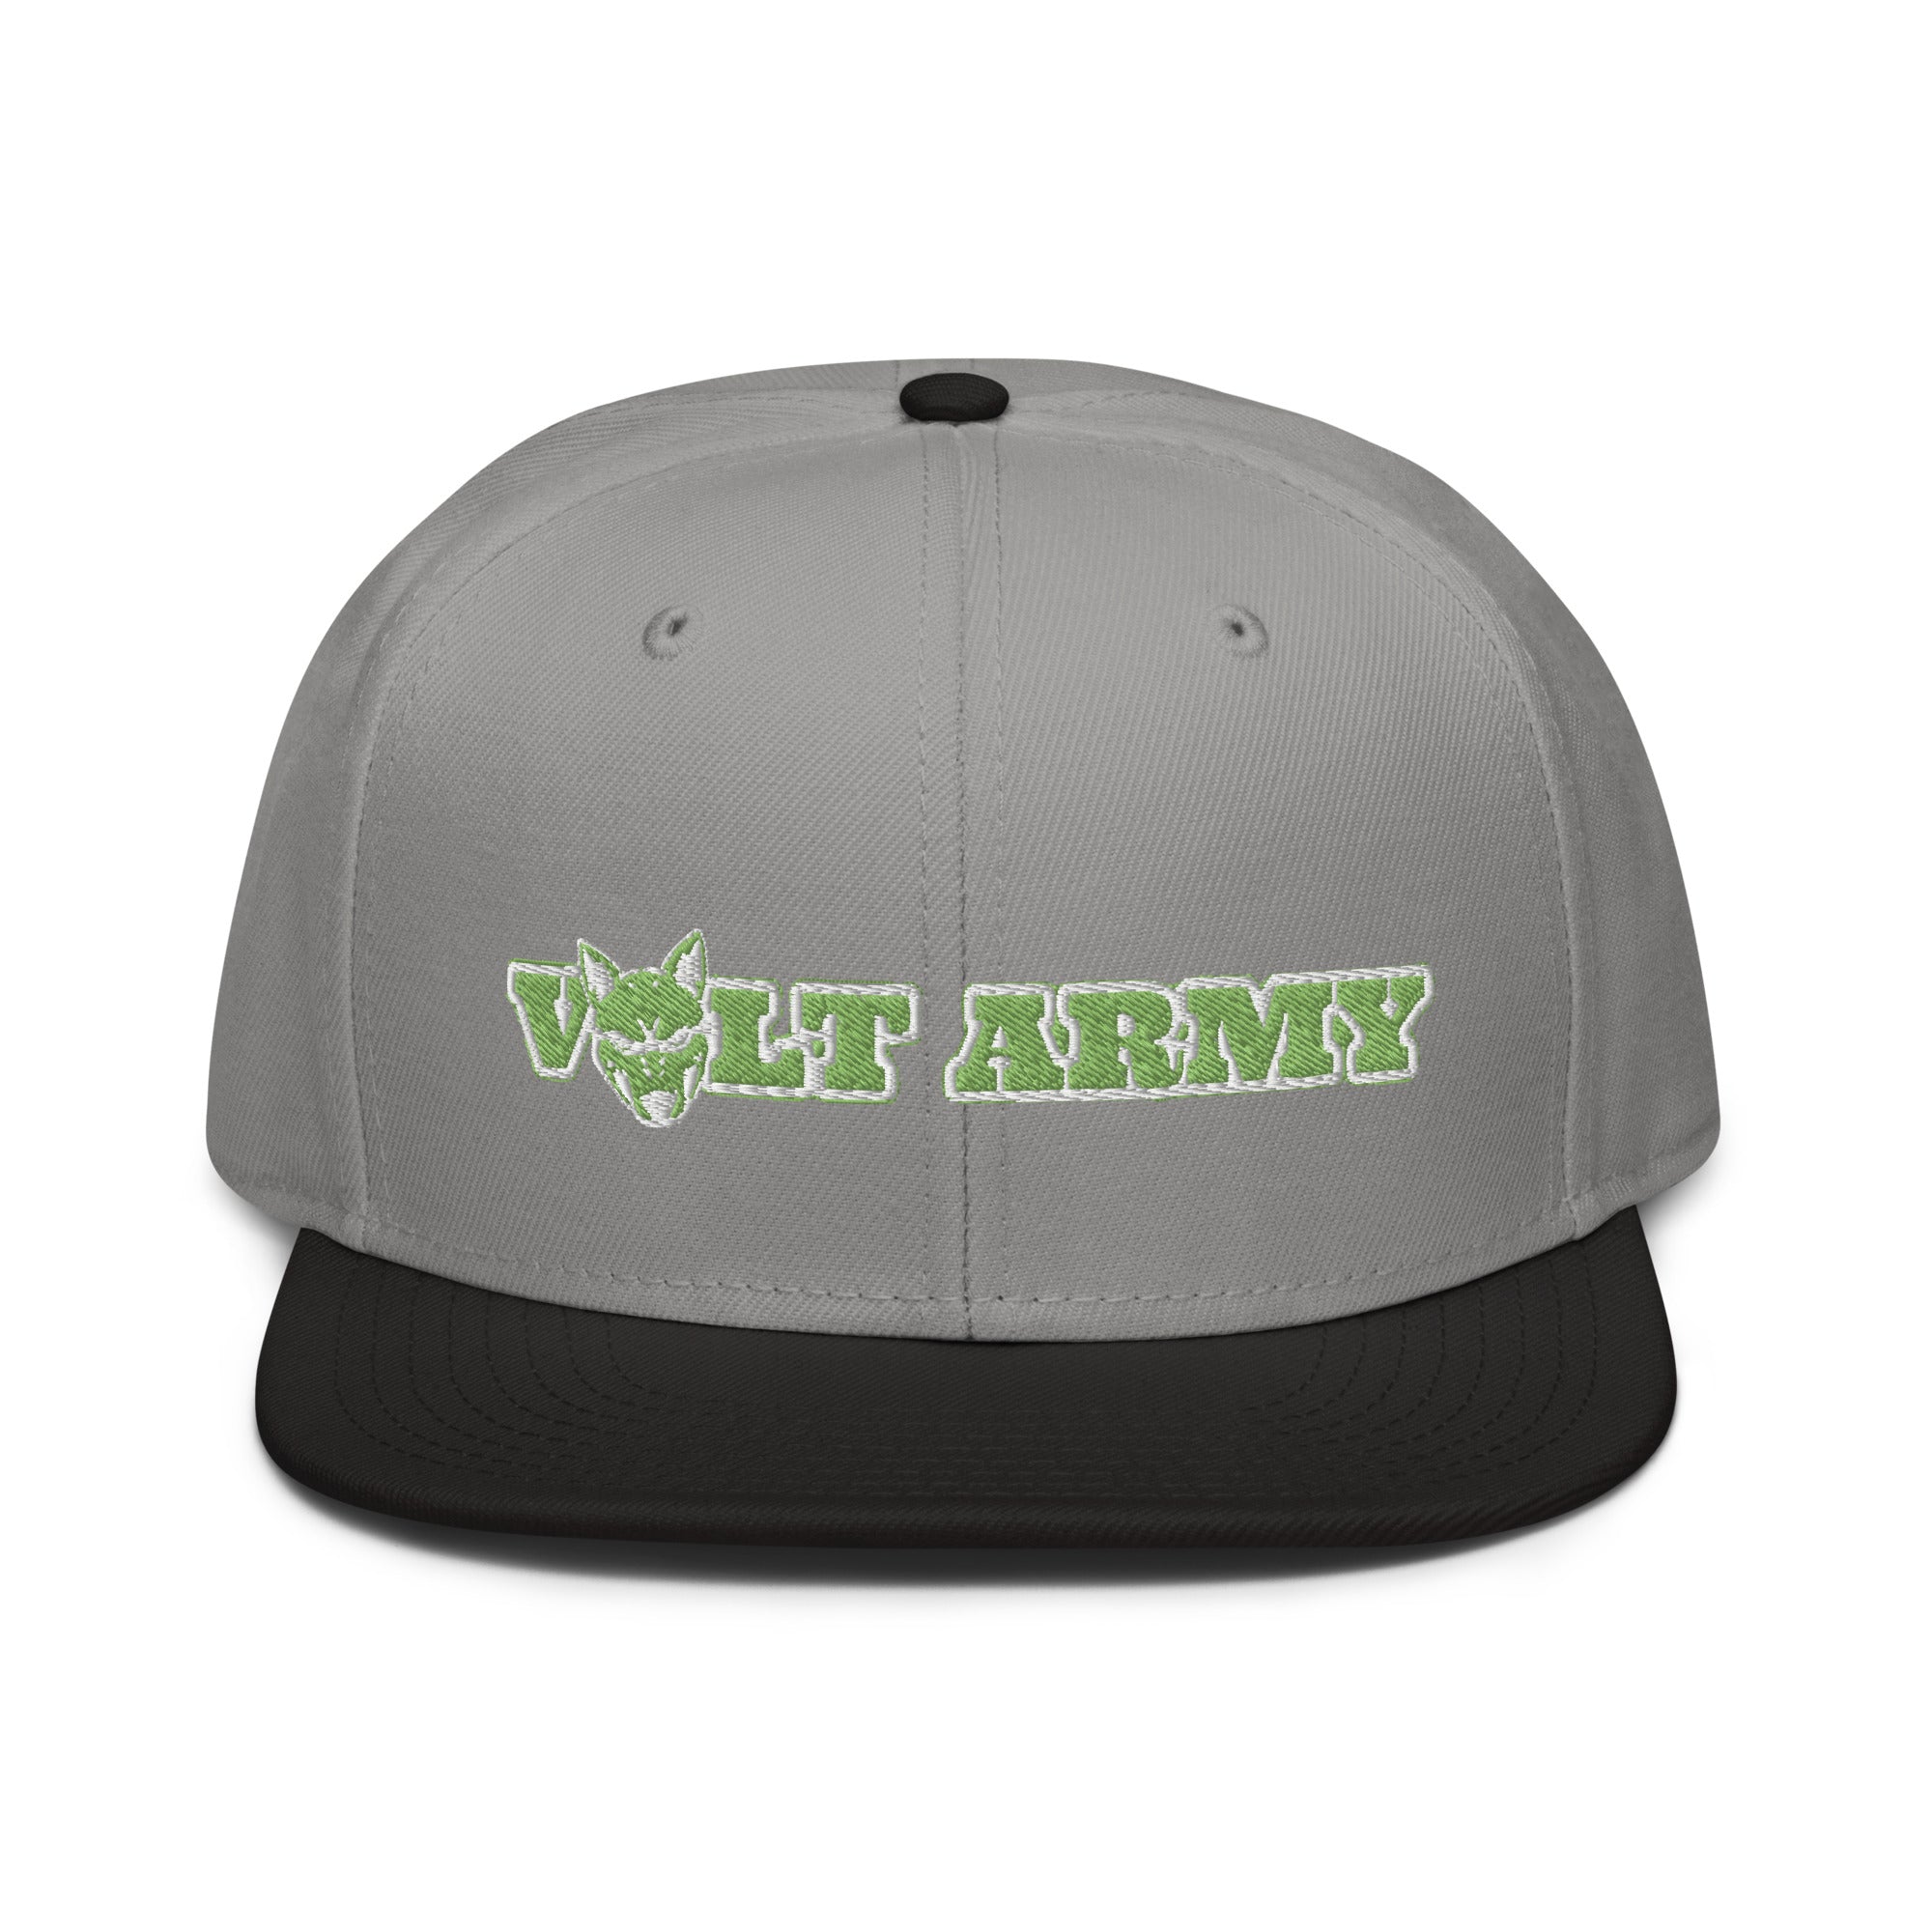 Volt Army White n Green Embroidery Snapback⚡️NFTees - NFTees365